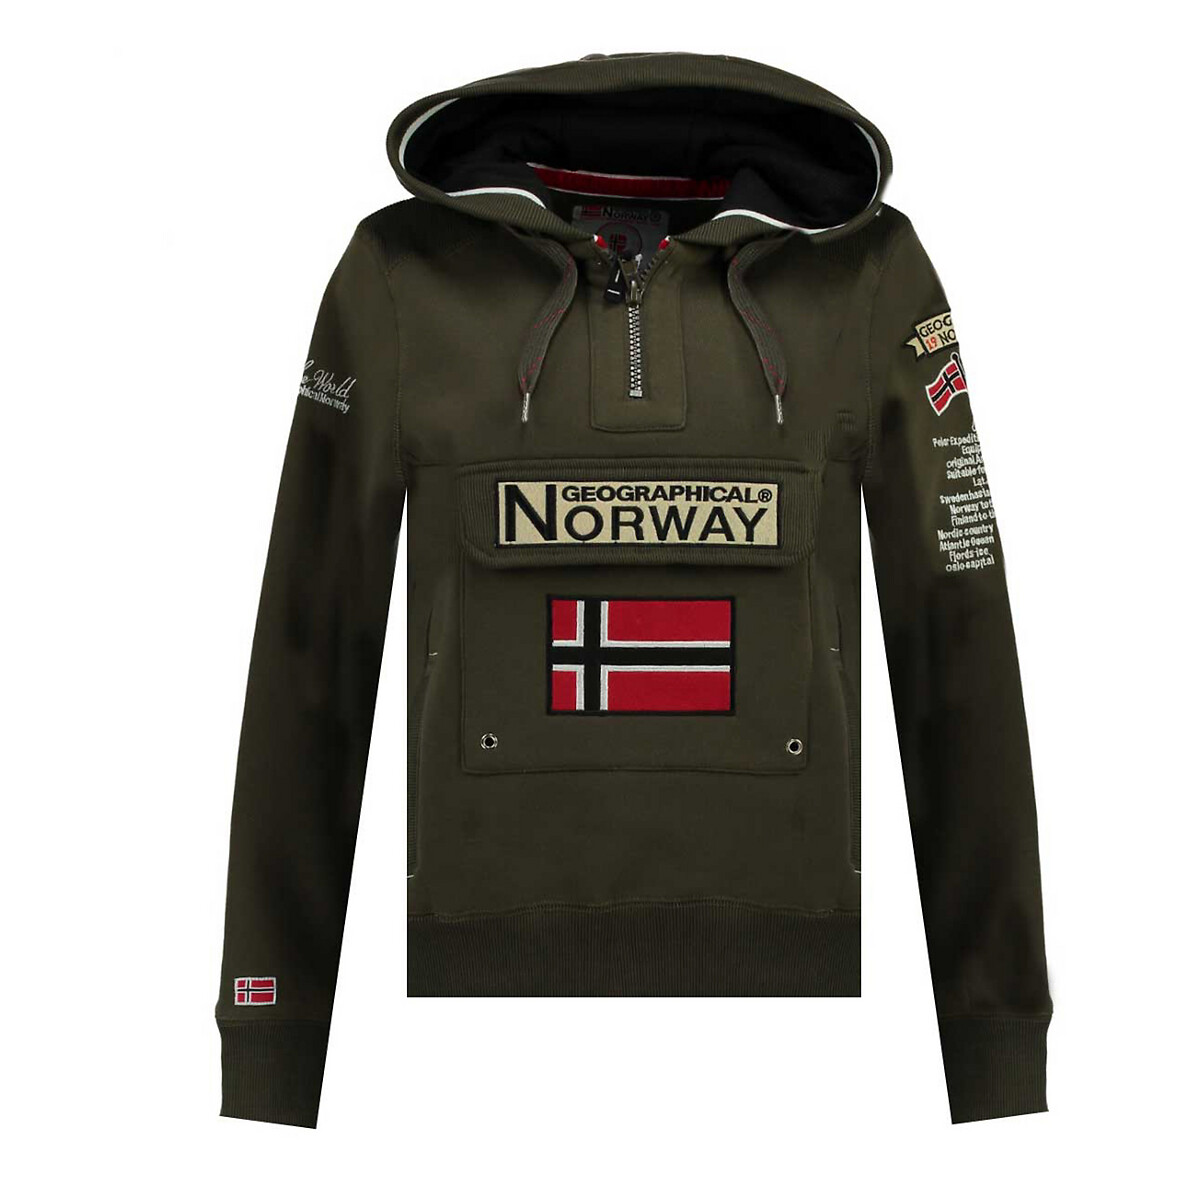 Geographical Norway Donna Alaska Giacca Foderato Inverno Sci Parka 